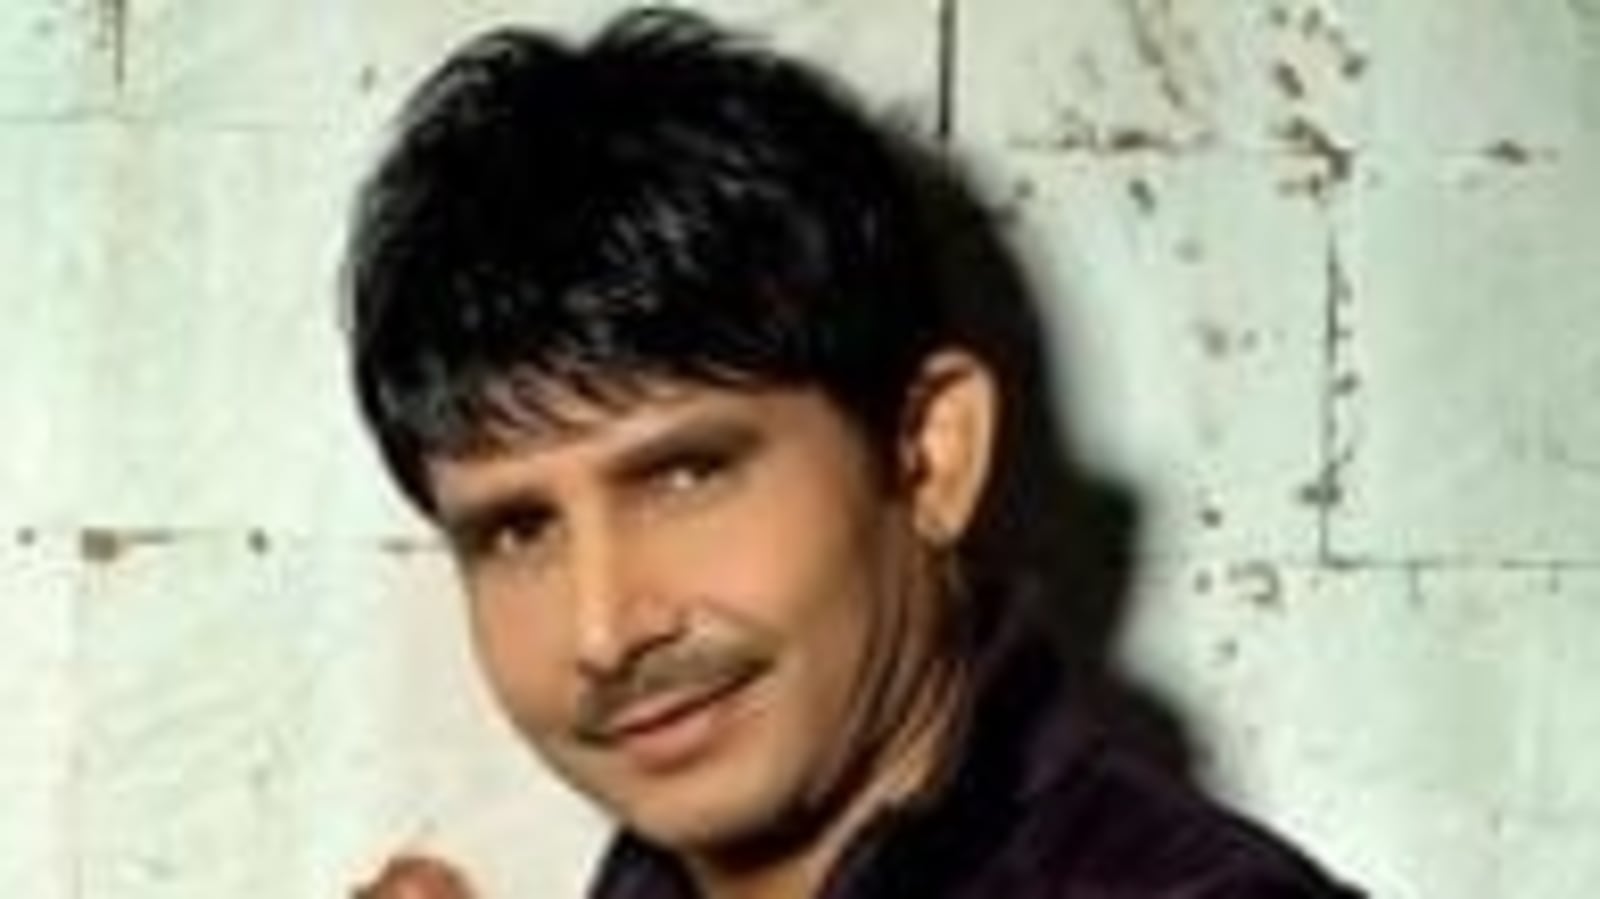 Kamal R Khan, also known as KRK, taken to hospital over chest pain complaints hours after arrest